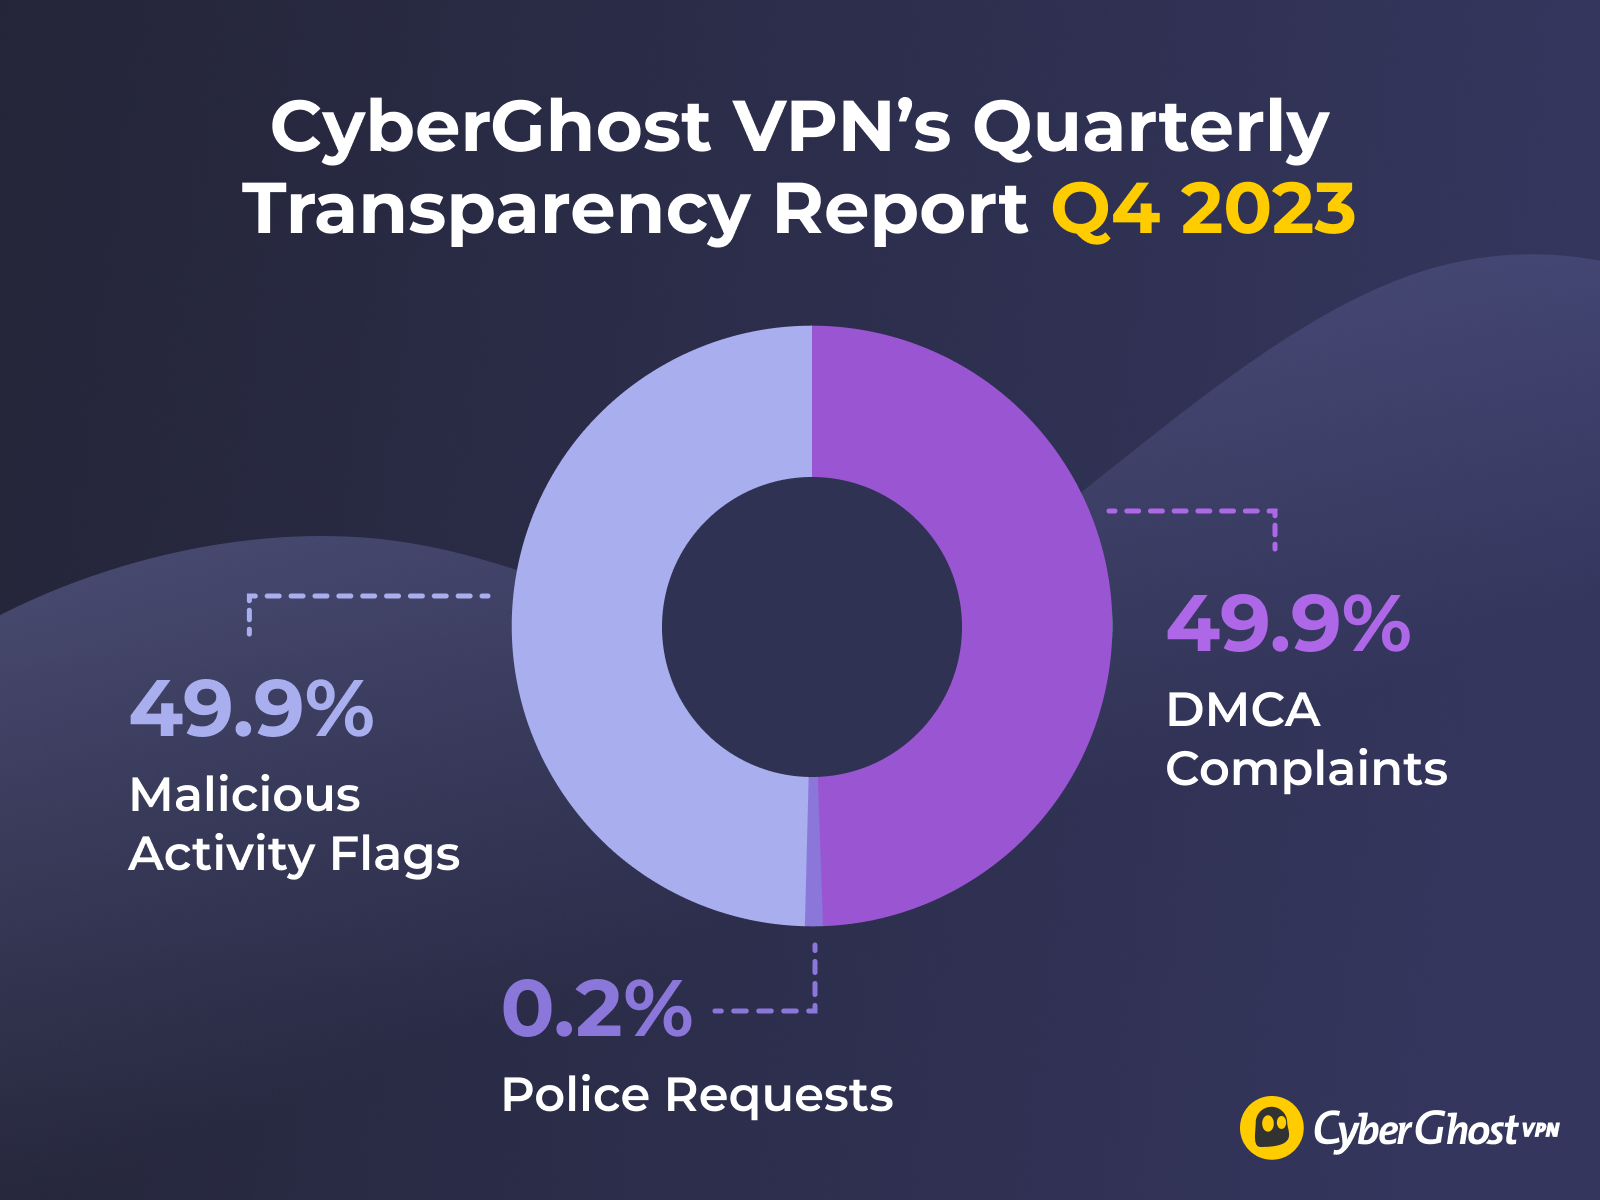 CyberGhost VPN's Quarterly Transparency Report numbers for Q4 2023